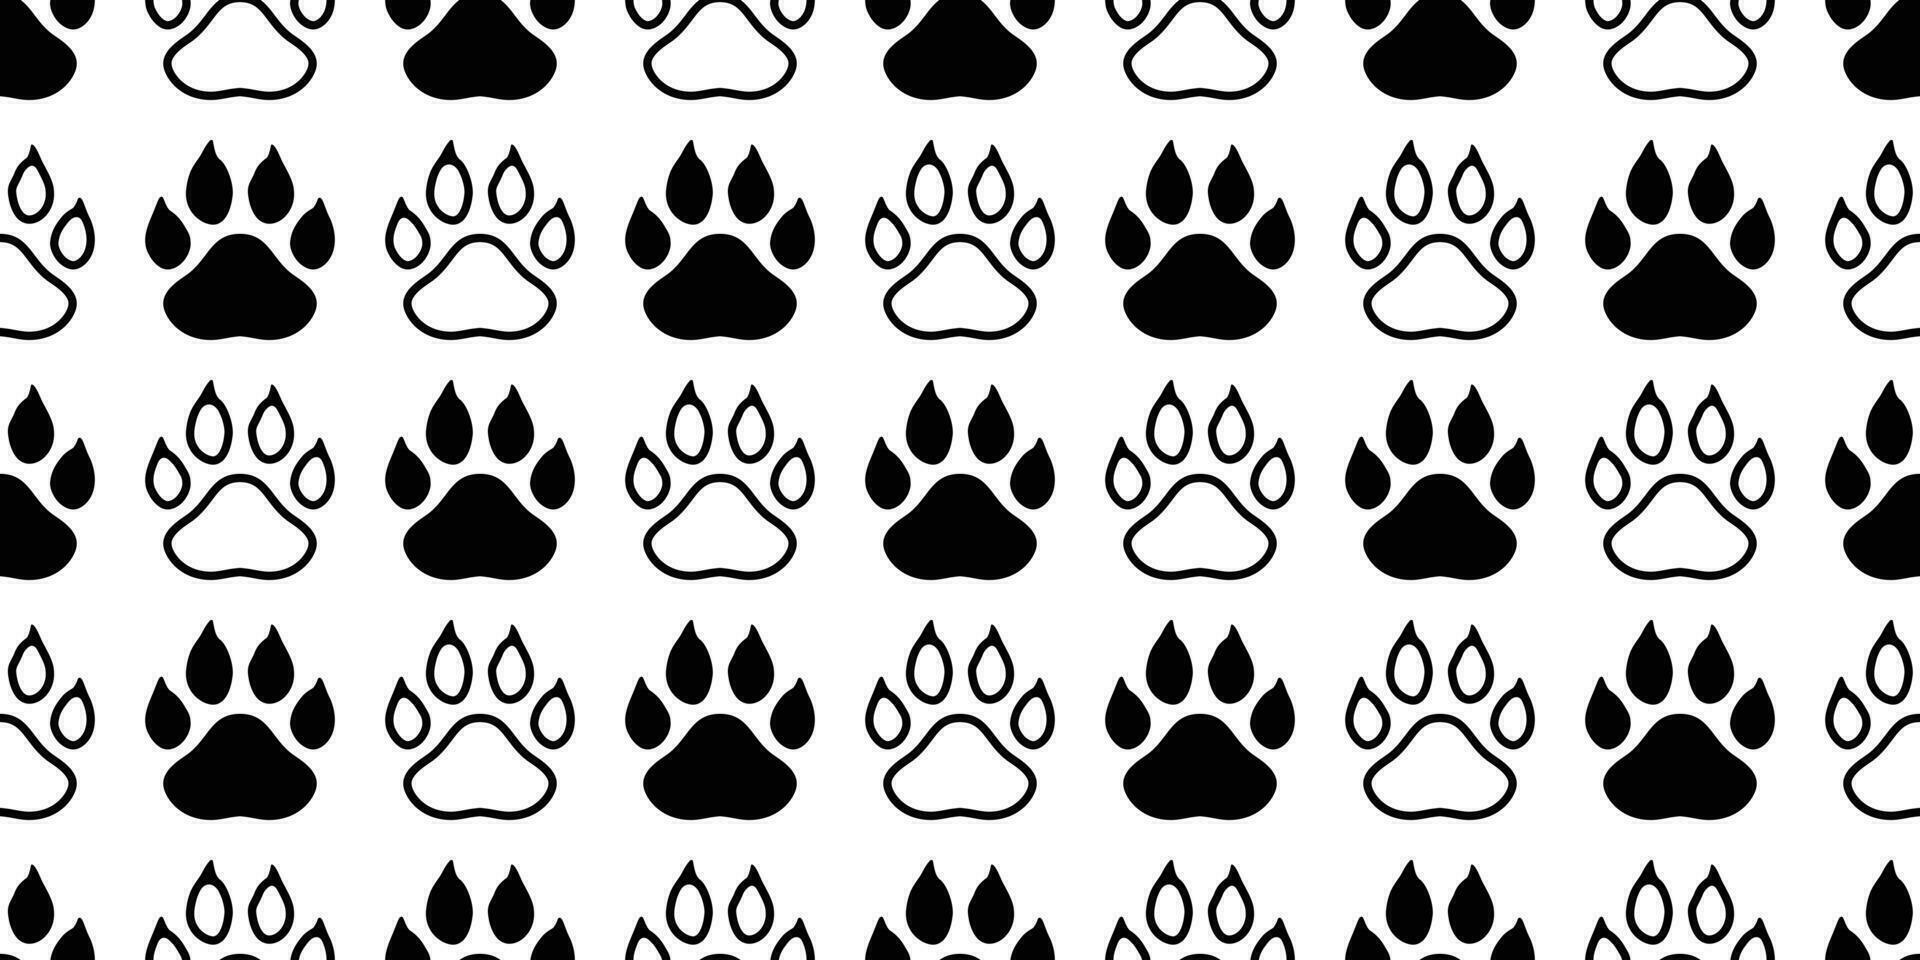 dog paw seamless pattern footprint vector bear polar cat pet french bulldog cartoon icon scarf isolated repeat wallpaper tile background illustration doodle design